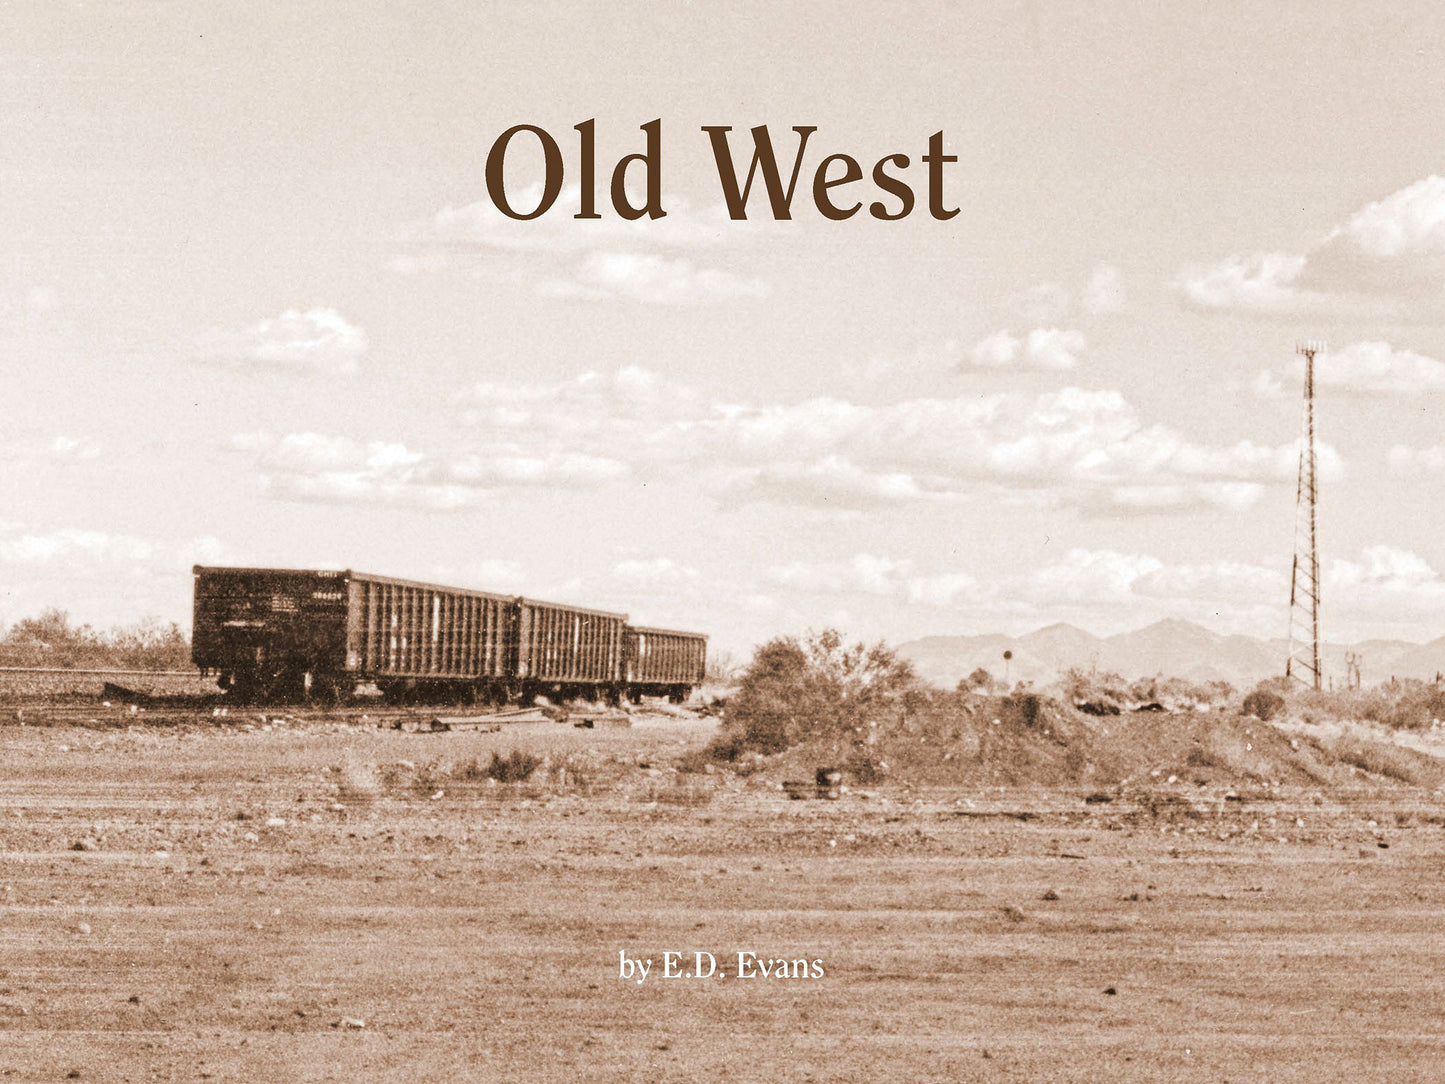 Old West: A Fable of the Gluttony of Understanding